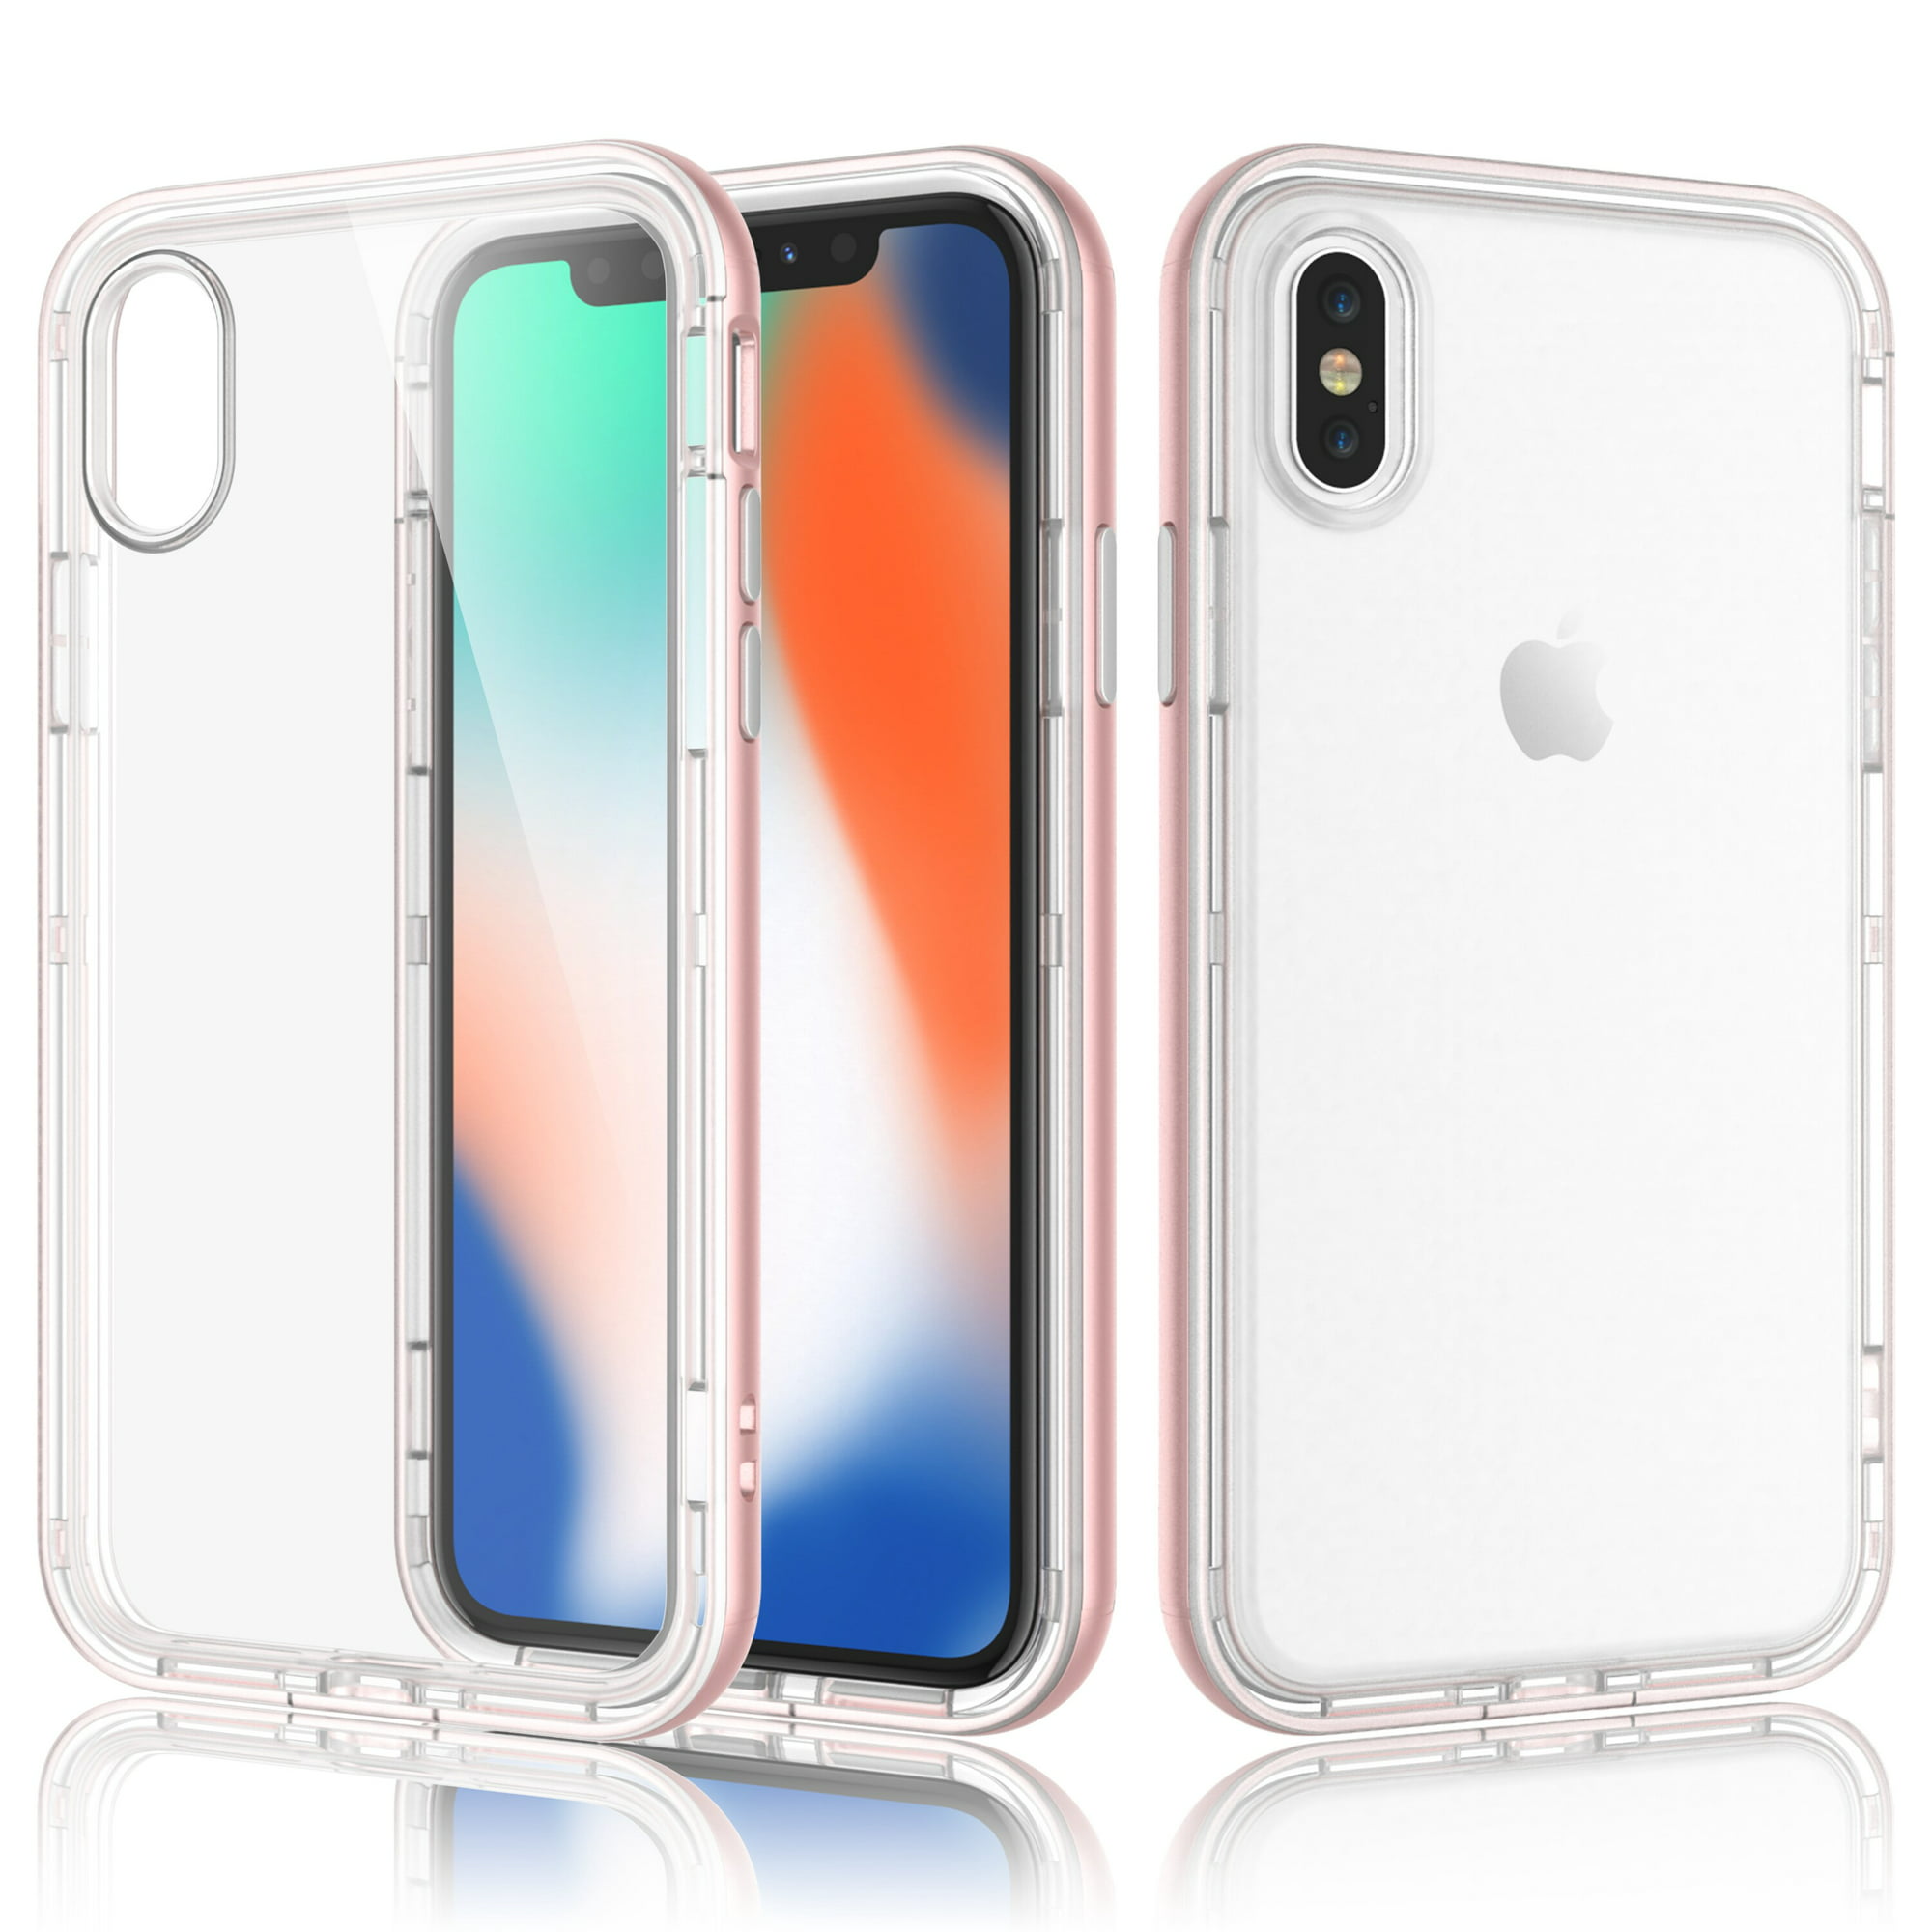 2018 iPhone XS Case, 2017 For iPhone X, Njjex Clear Soft TPU Back Case Hybrid Shockproof Bumper Slim Cover For Apple iPhone 5.8 inch (2017 & 2018 Release) -Rose Gold - Walmart.com